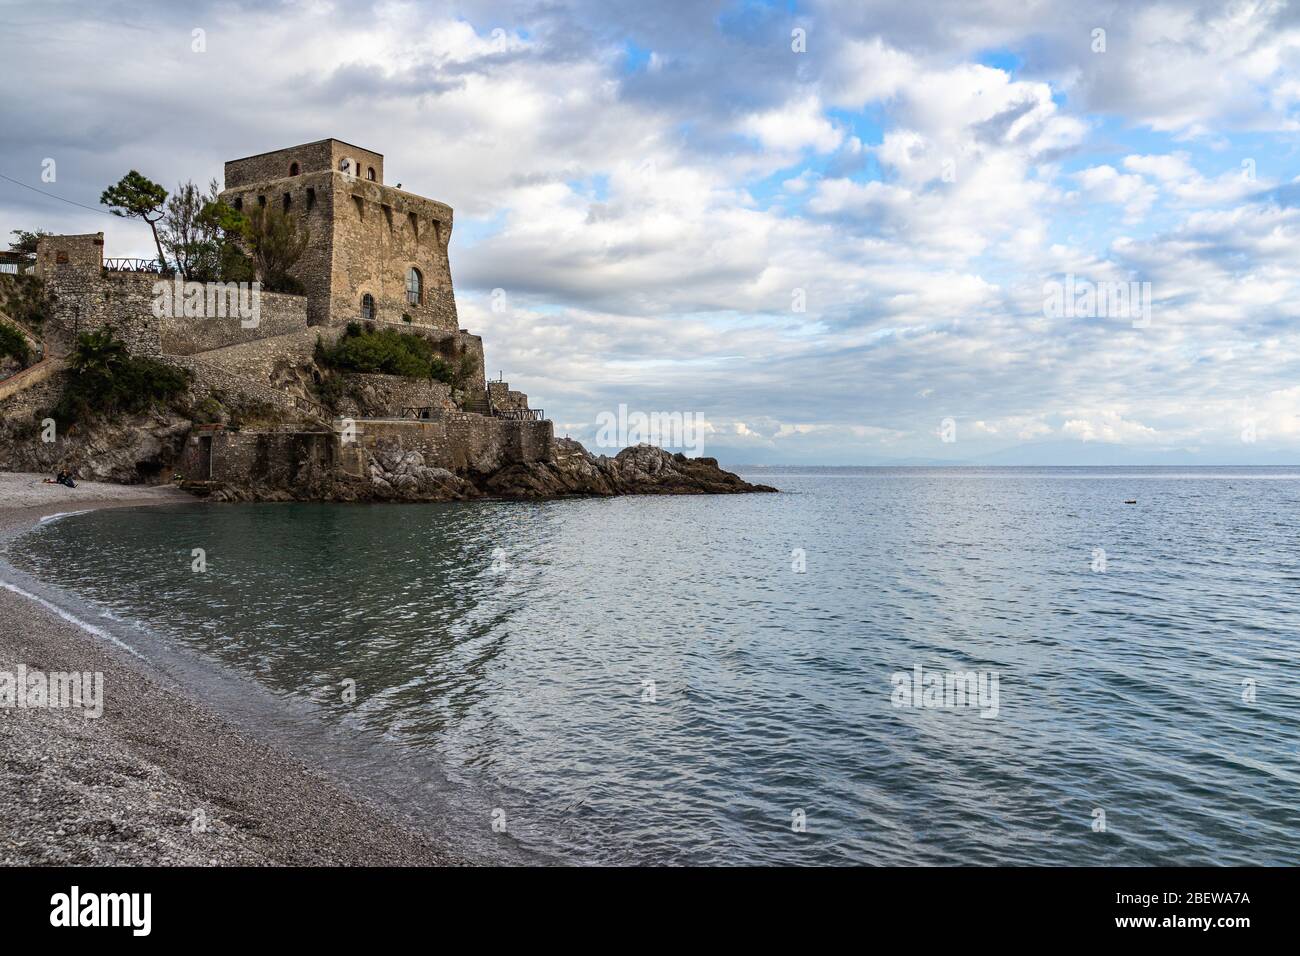 The beach of Erchie, a small village on the Amalfi Coast dominated by the Cernaiola tower, Campania, Italy, Stock Photo